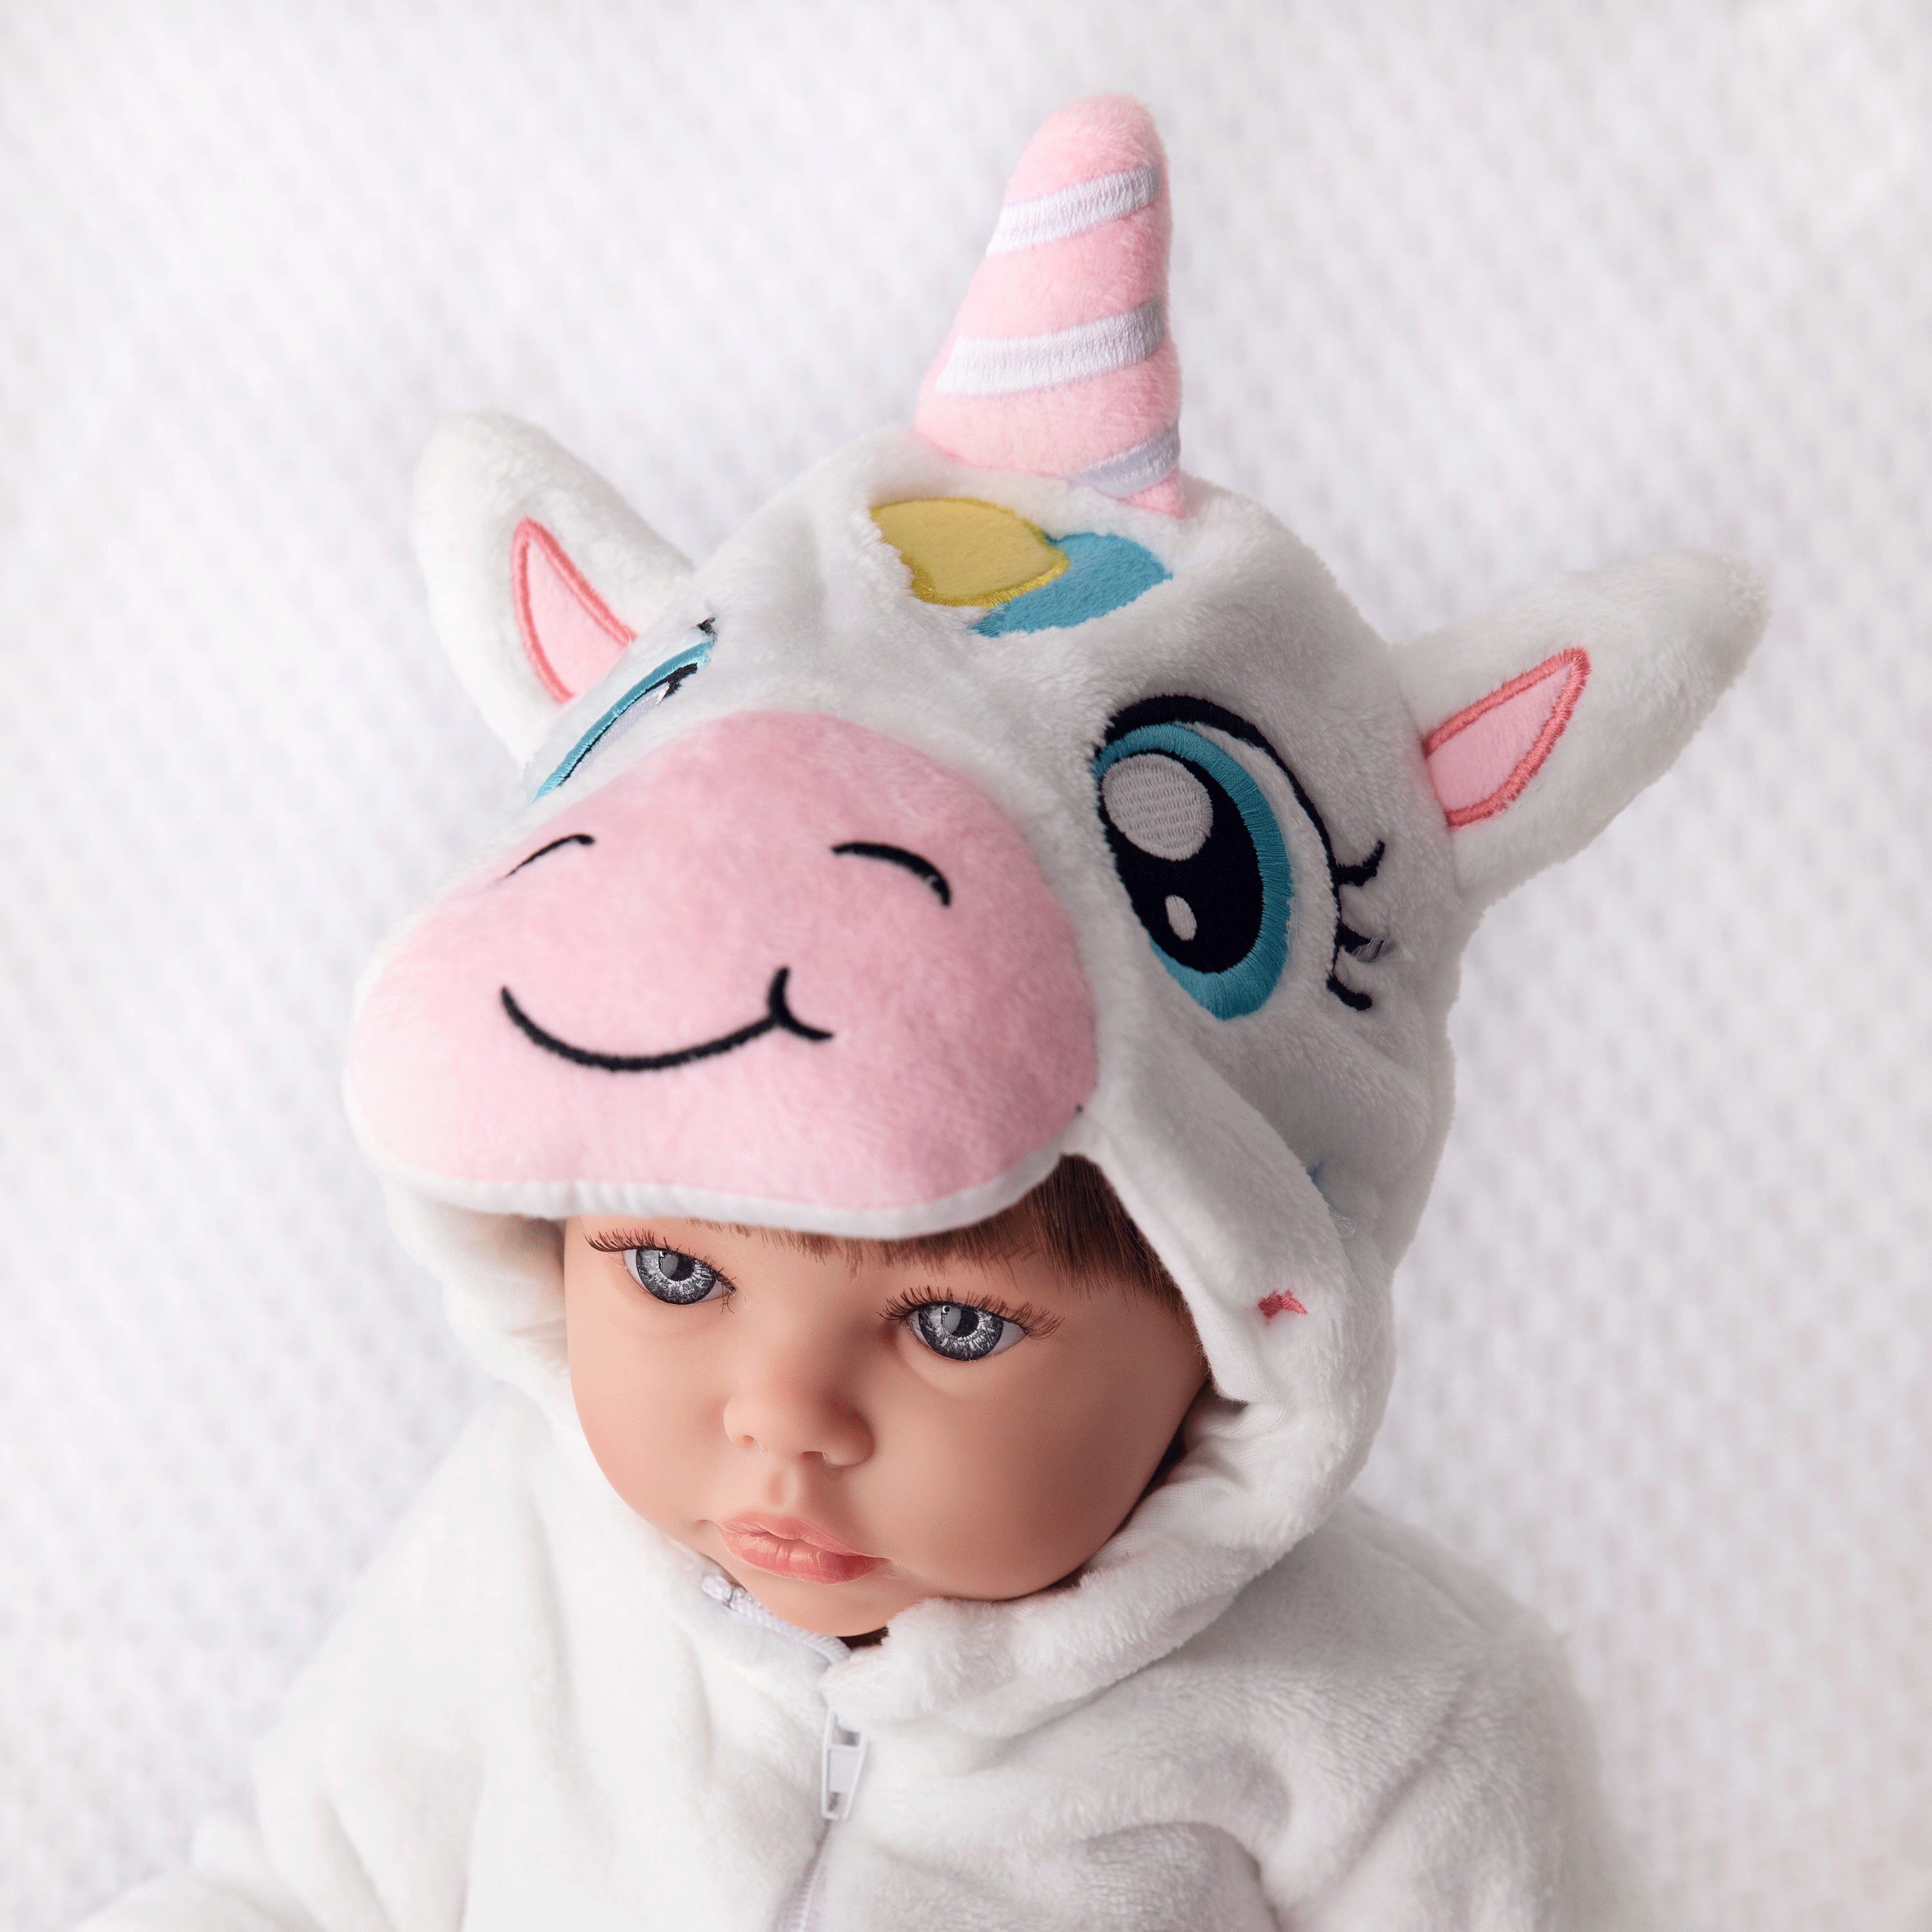 Bebe Reborn April Reborn Doll - 52CM and 2KG - FULL BODY OF SILICONE VINYL and WATHABLE 